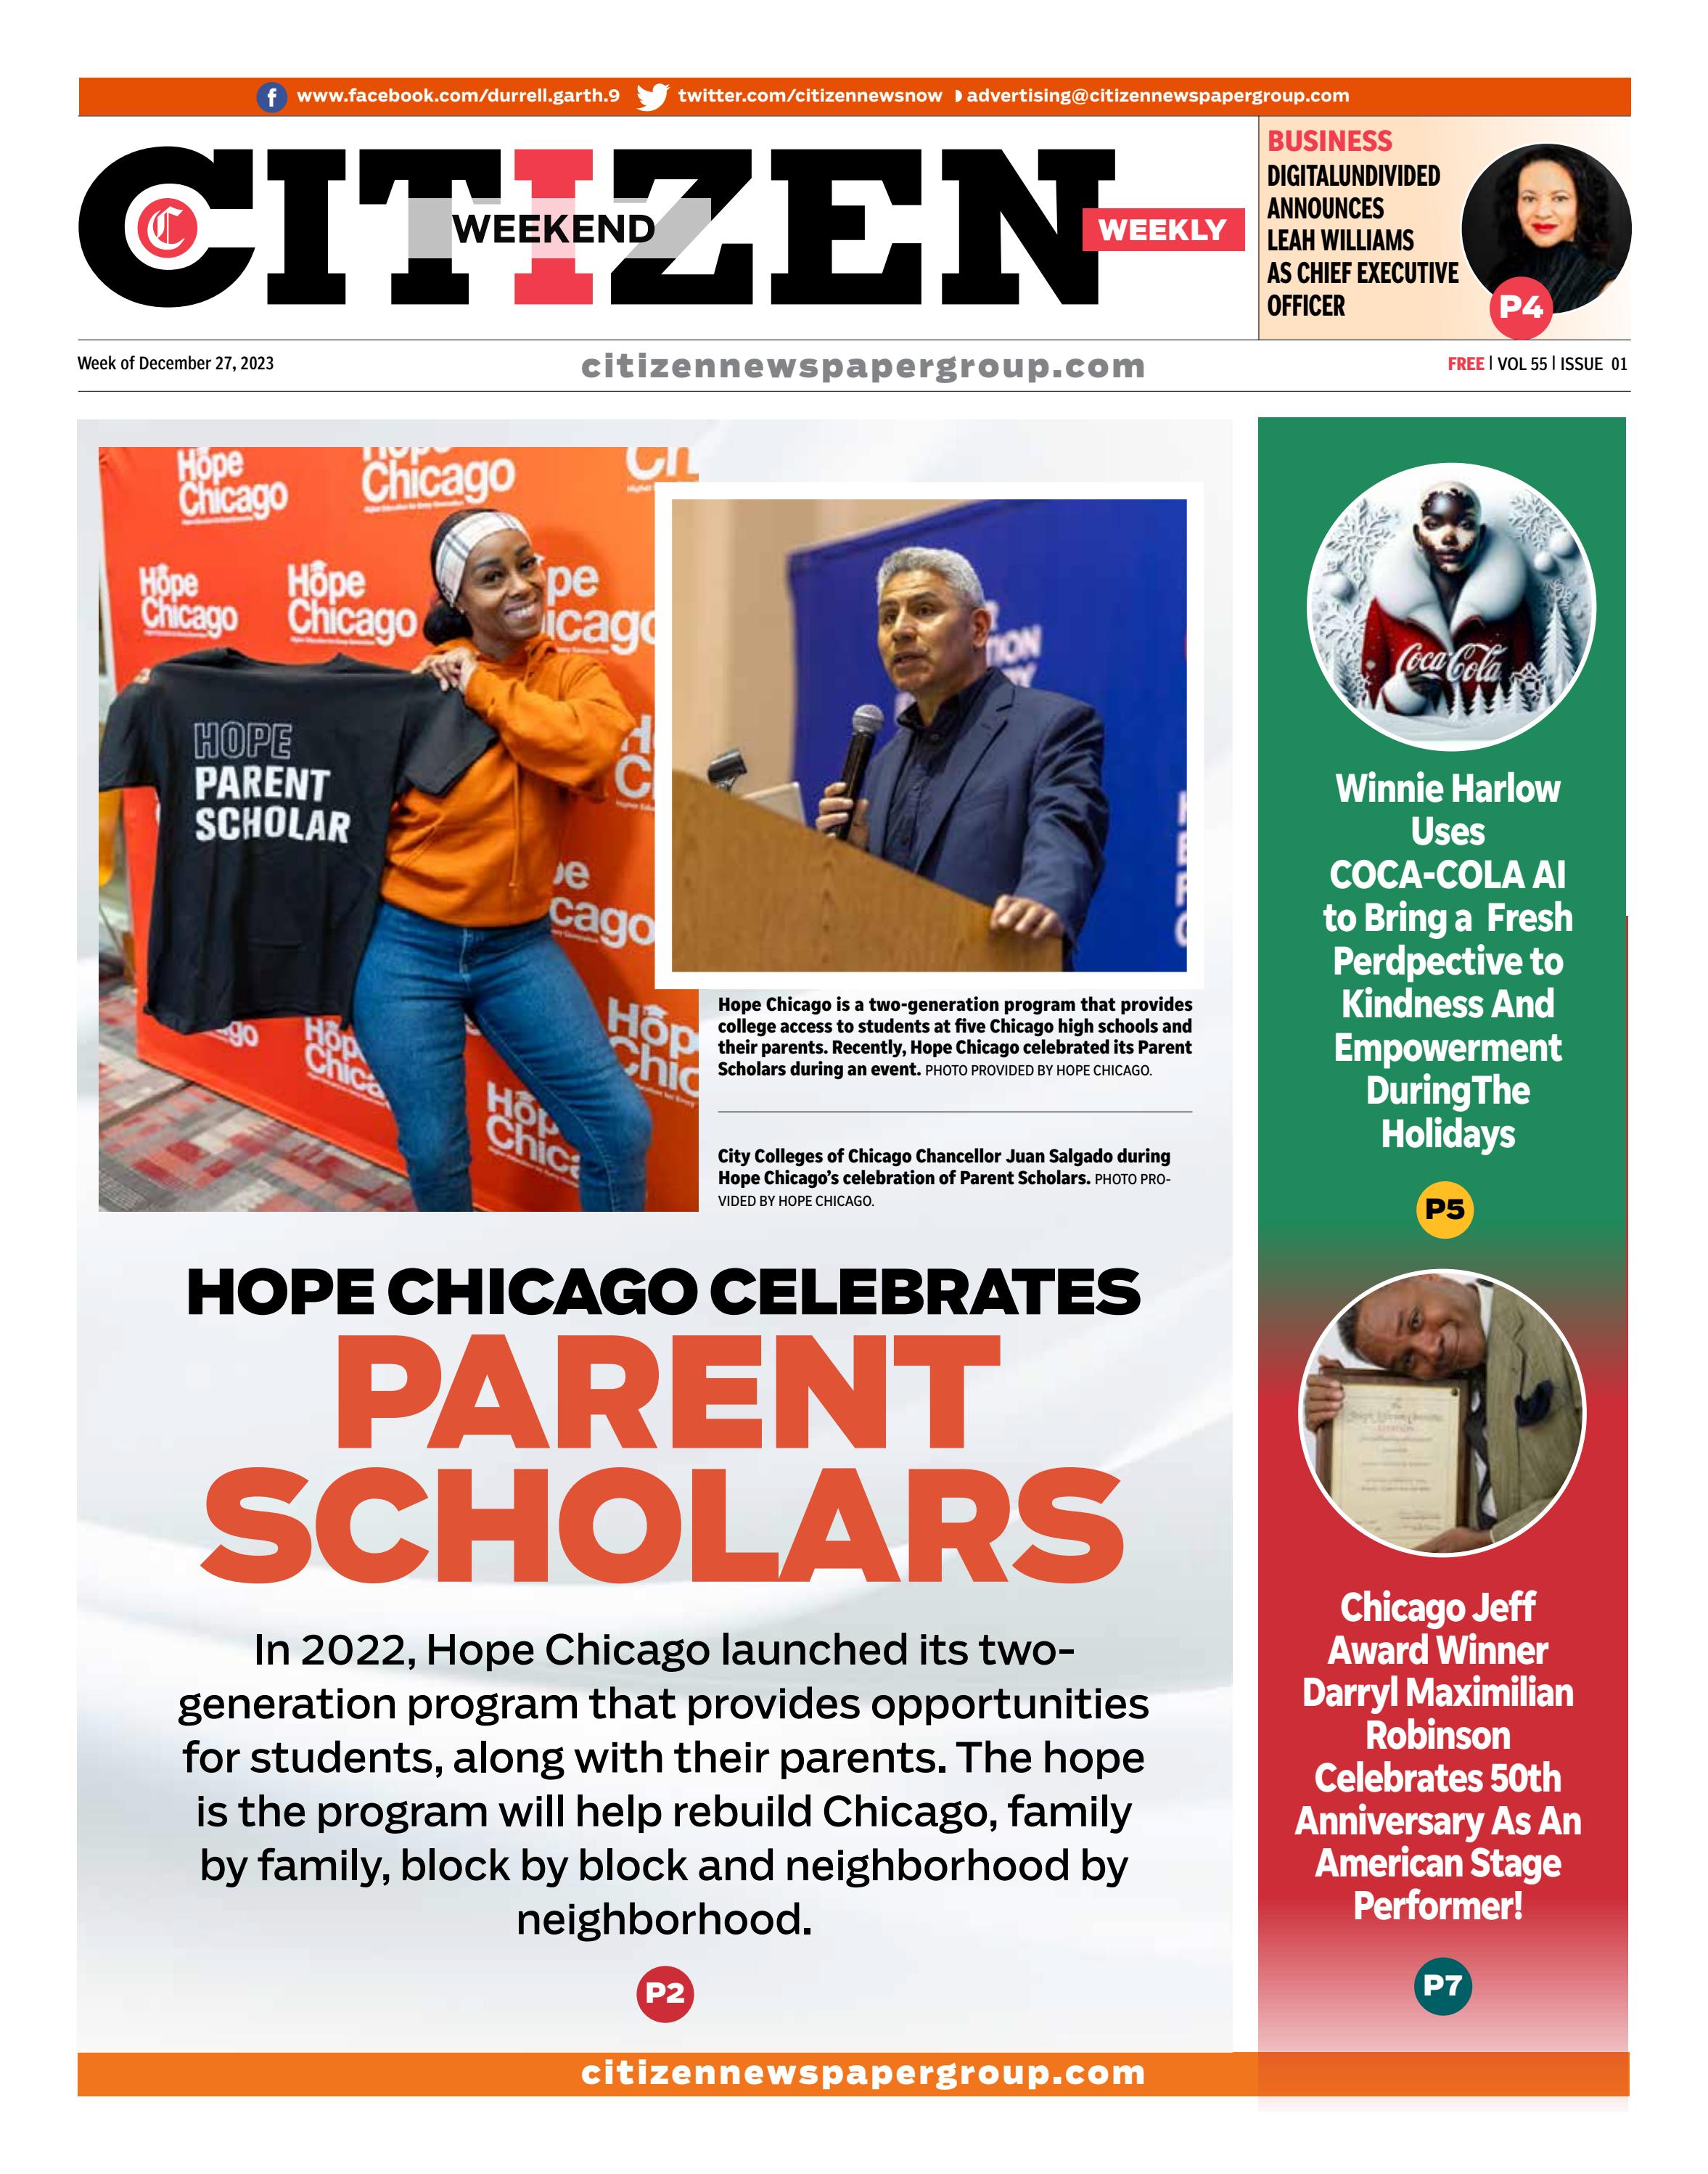 Local Recognition: Darryl Maximilian Robinson appears on the cover page of the 12-27-2023 Chicago Weekend Citizen Newspaper in a story about his 50th Anniversary as an American Stage Performer.